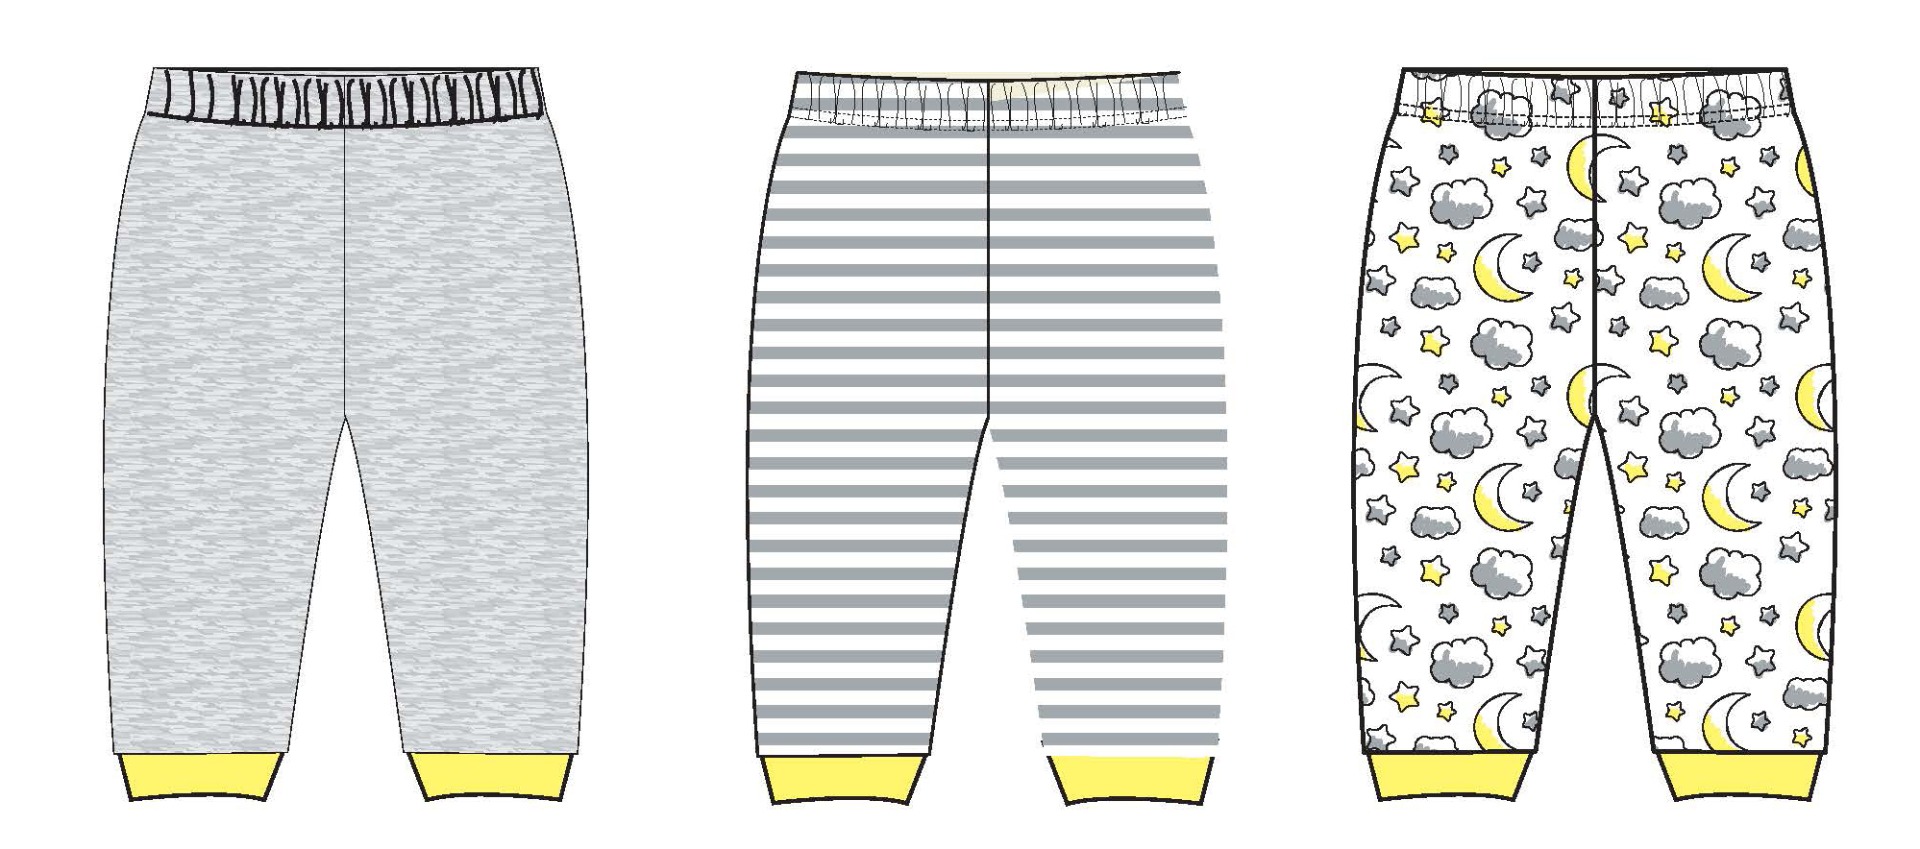 ''Gender Neutral Baby's Printed Pull-On PANTS w/ Striped, Heathered, & Night Sky Print - Sizes 0/3M-9